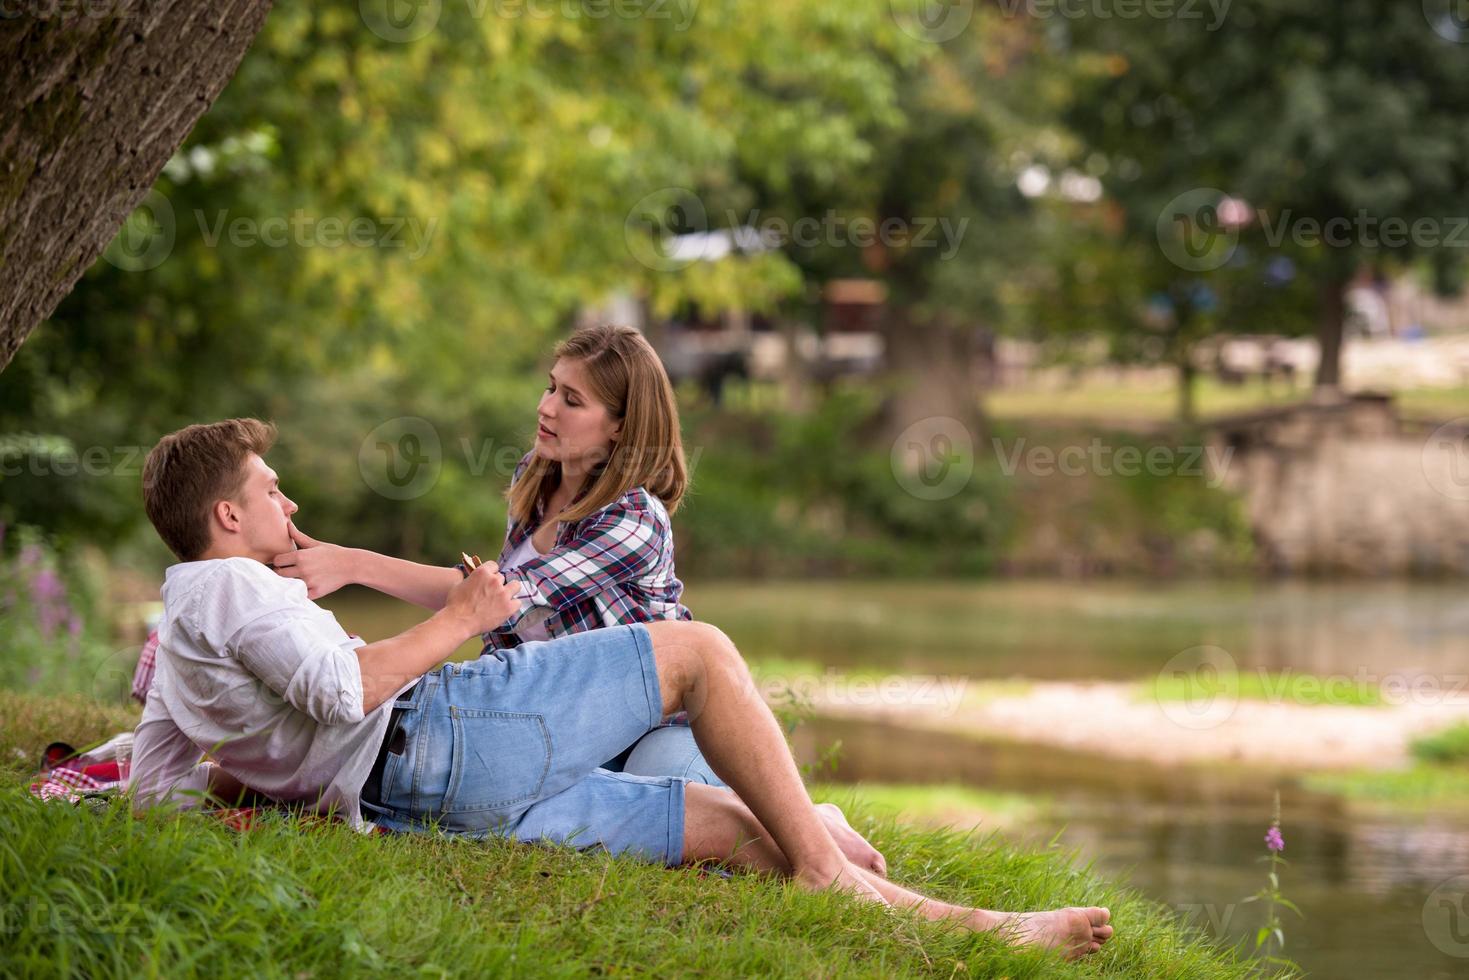 Couple in love enjoying picnic time photo